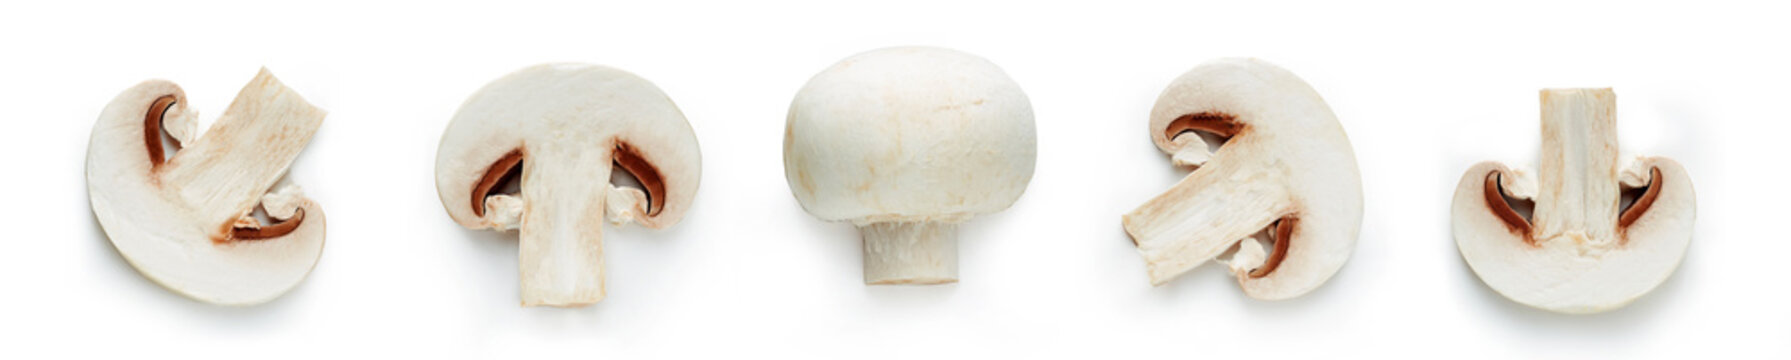 Set of fresh whole and sliced champignon mushrooms isolated on white background. Top view 